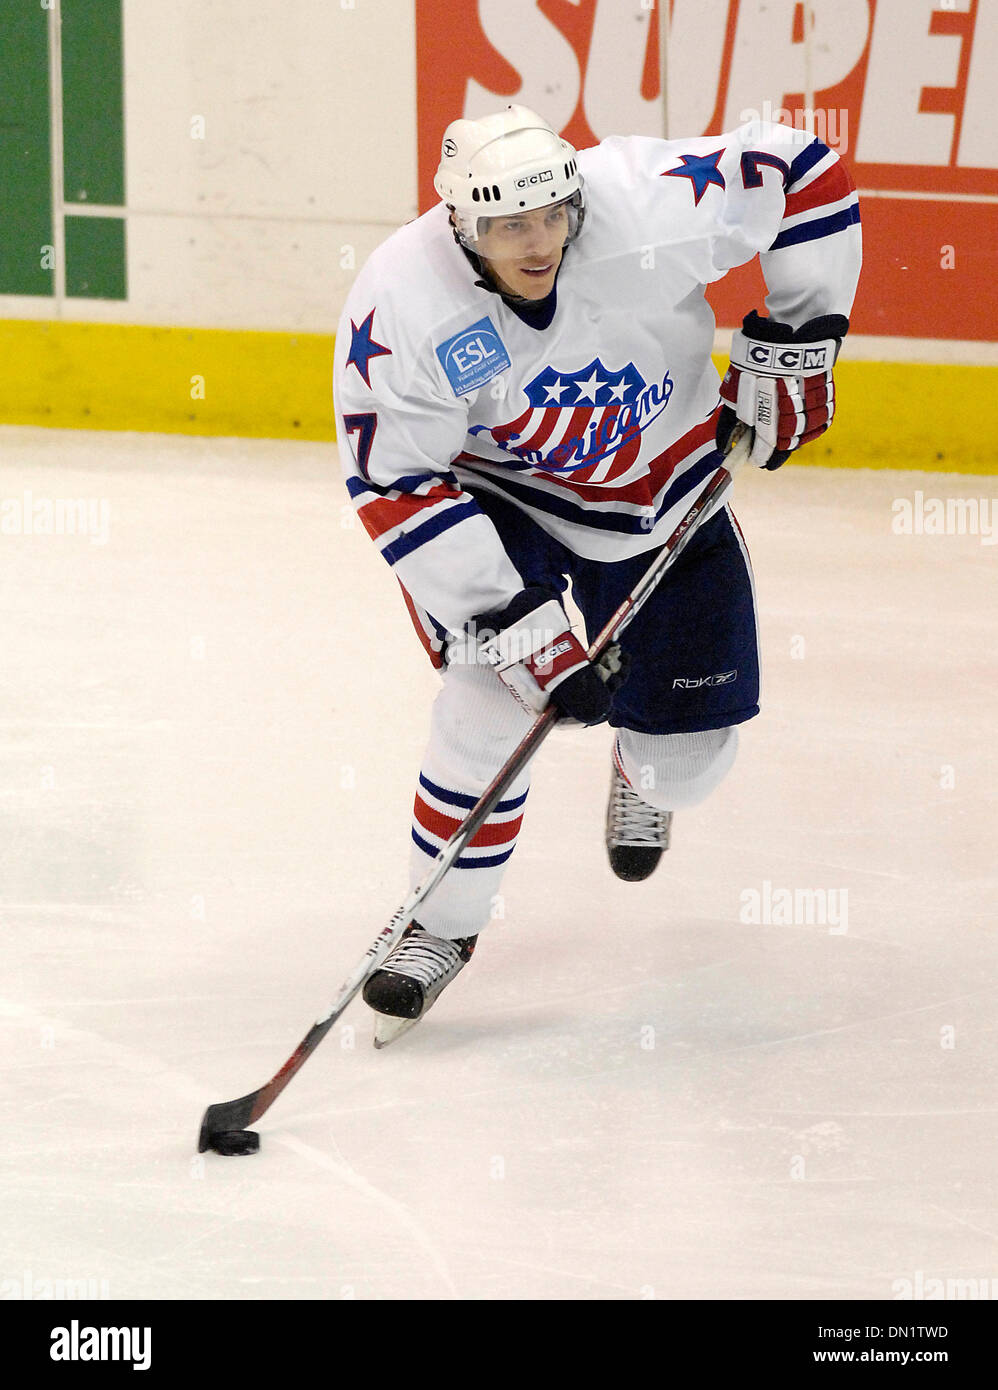 November 17, 2006: AHL - Rochester center Drew Larman #7 in action against Manitoba. The Manitoba Canucks at Rochester Americans at the Blue Cross Arena at the War Memorial Auditorium. Rochester defeated Manitoba 4 to 3 in OT.(Credit Image: © Alan Schwartz/Cal Sport Media) Stock Photo